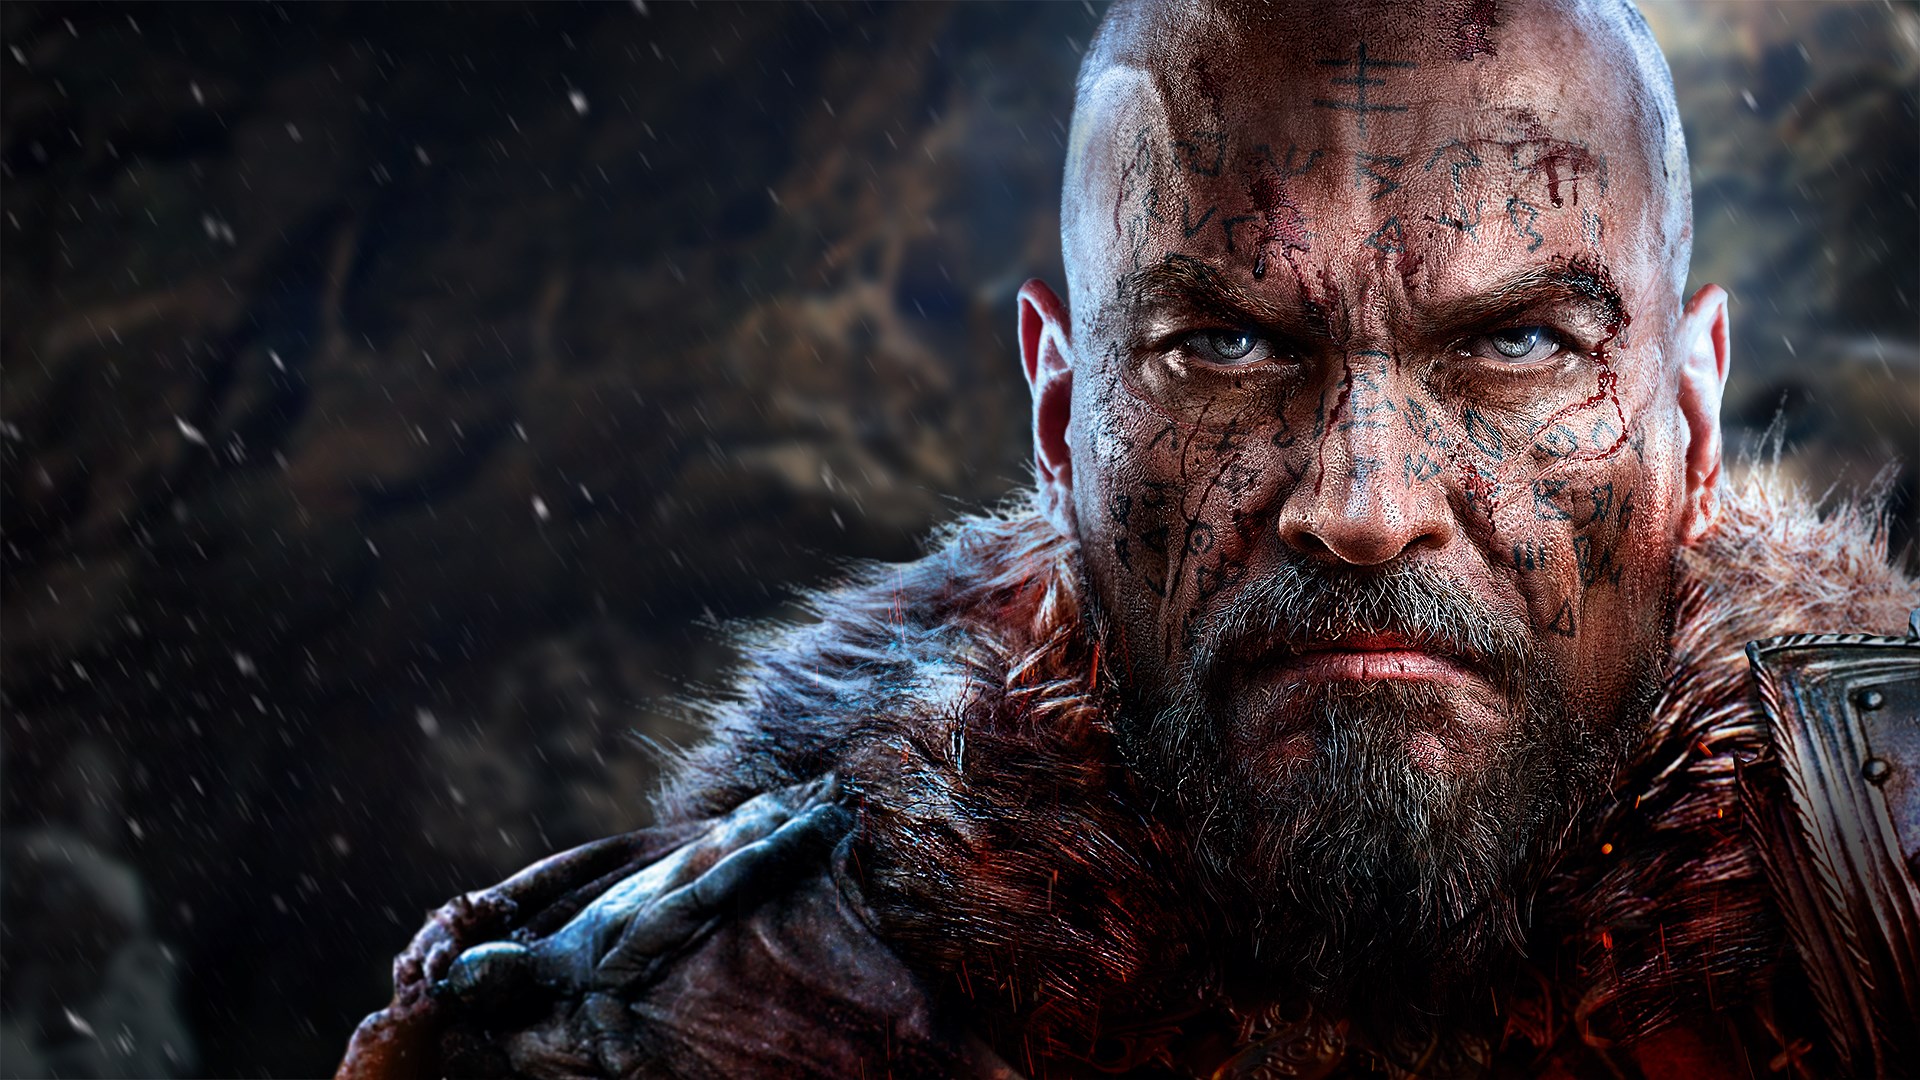 Buy Now - Lords of the Fallen